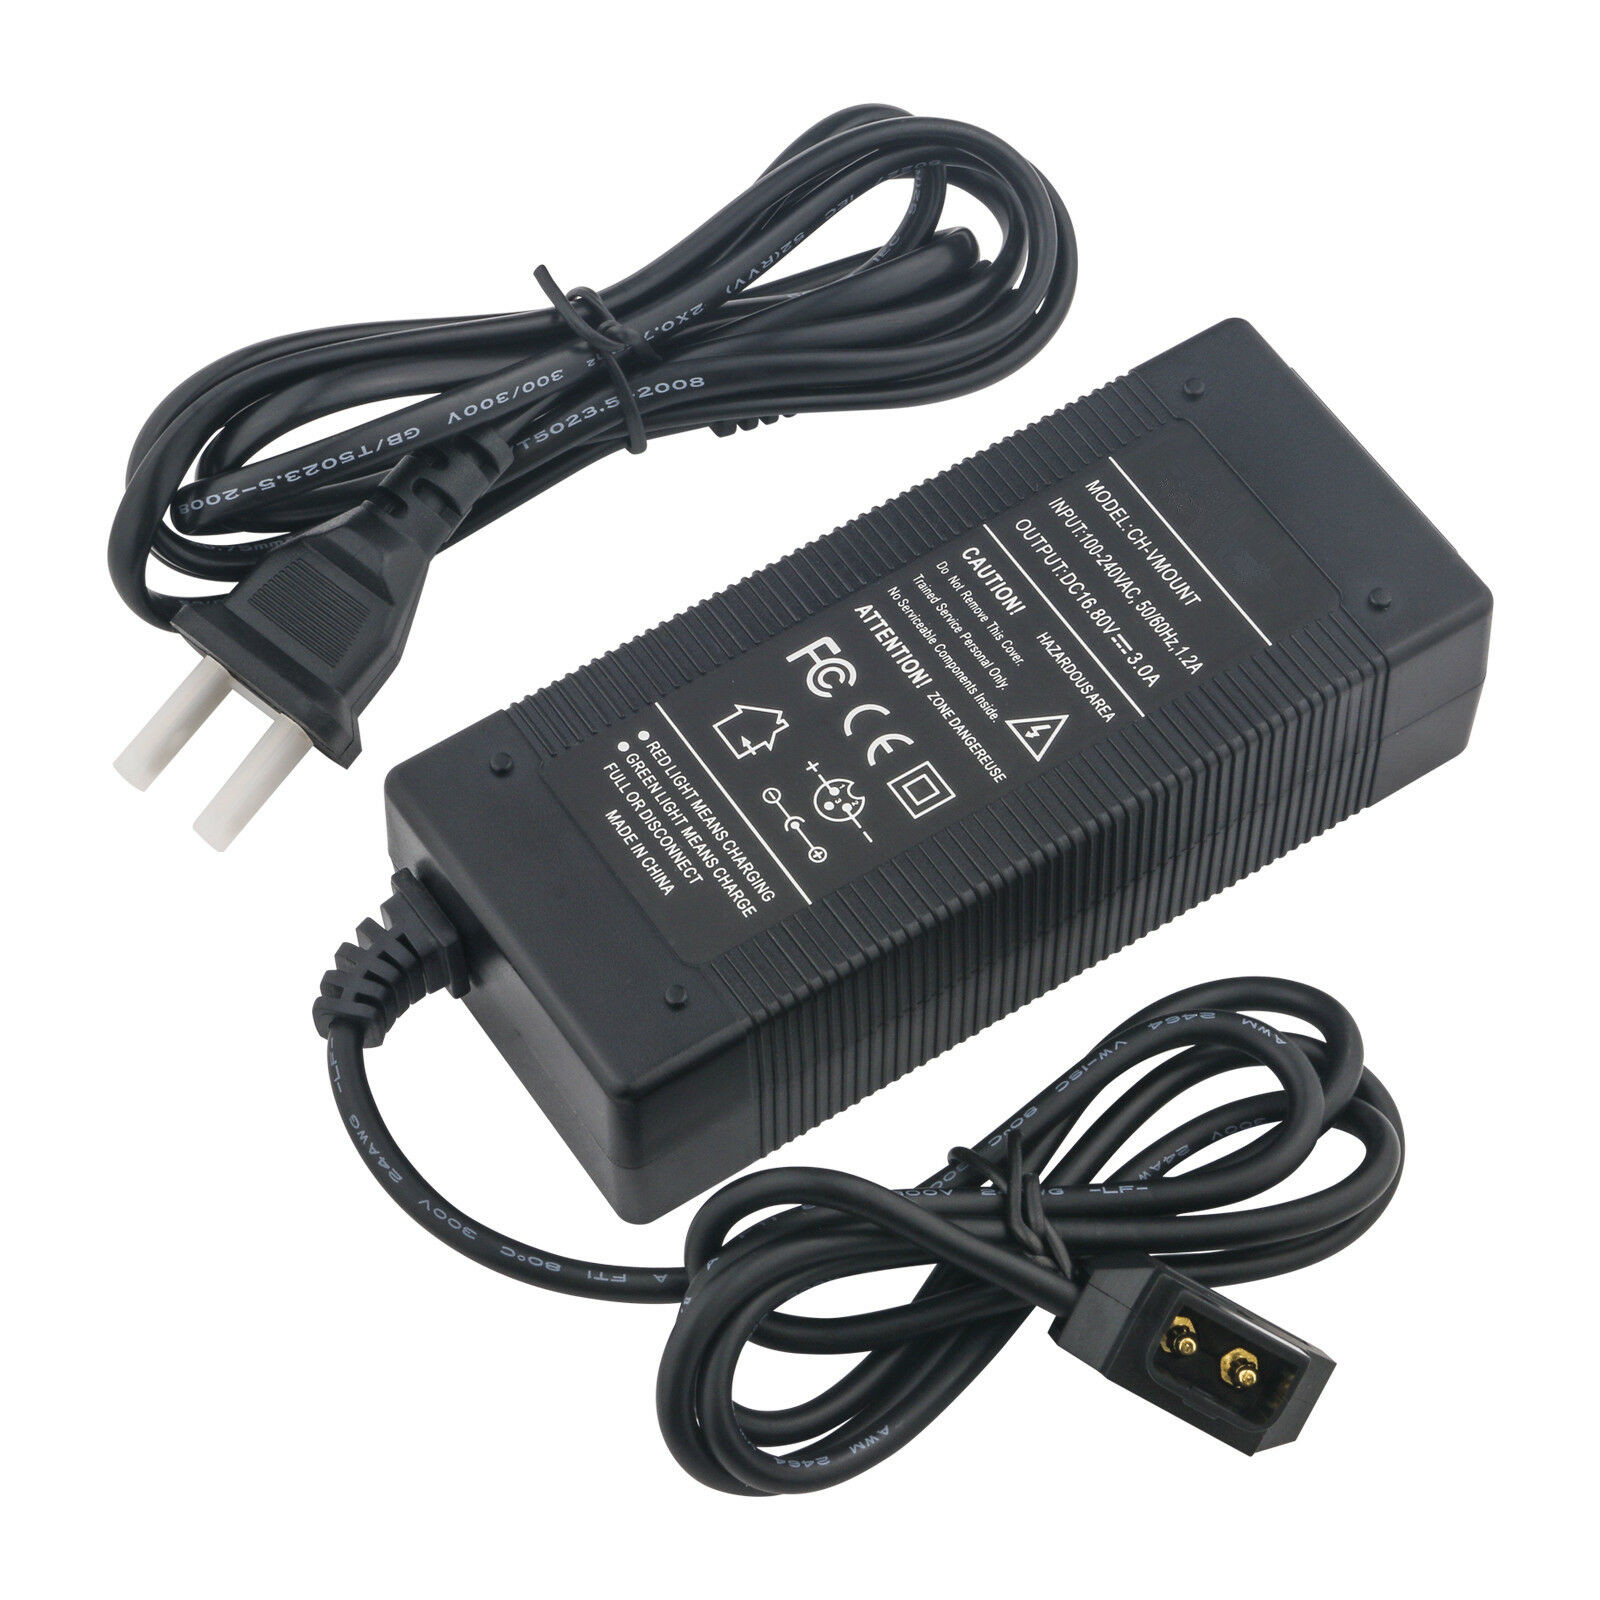 SONY BVP-7 battery charger